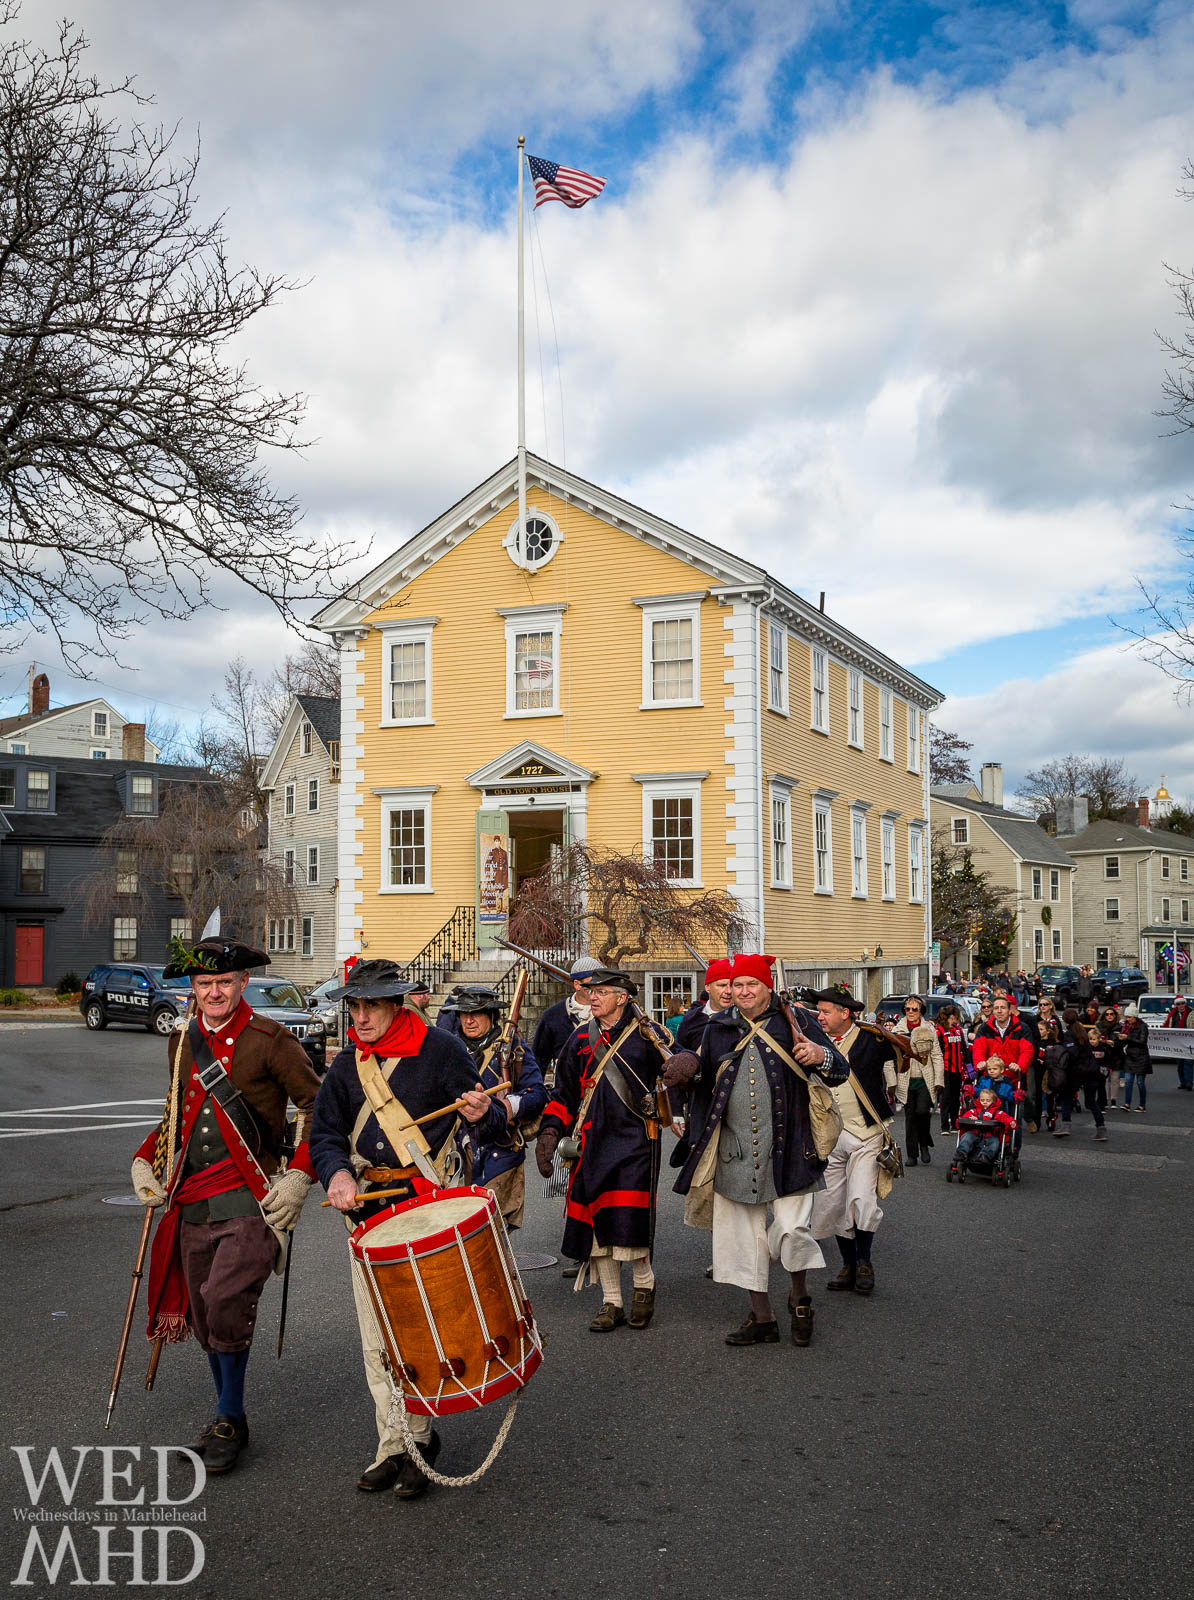 Glover's Regiment leads the annual Marblehead Christmas Walk Parade along Washington Street past Old Town House